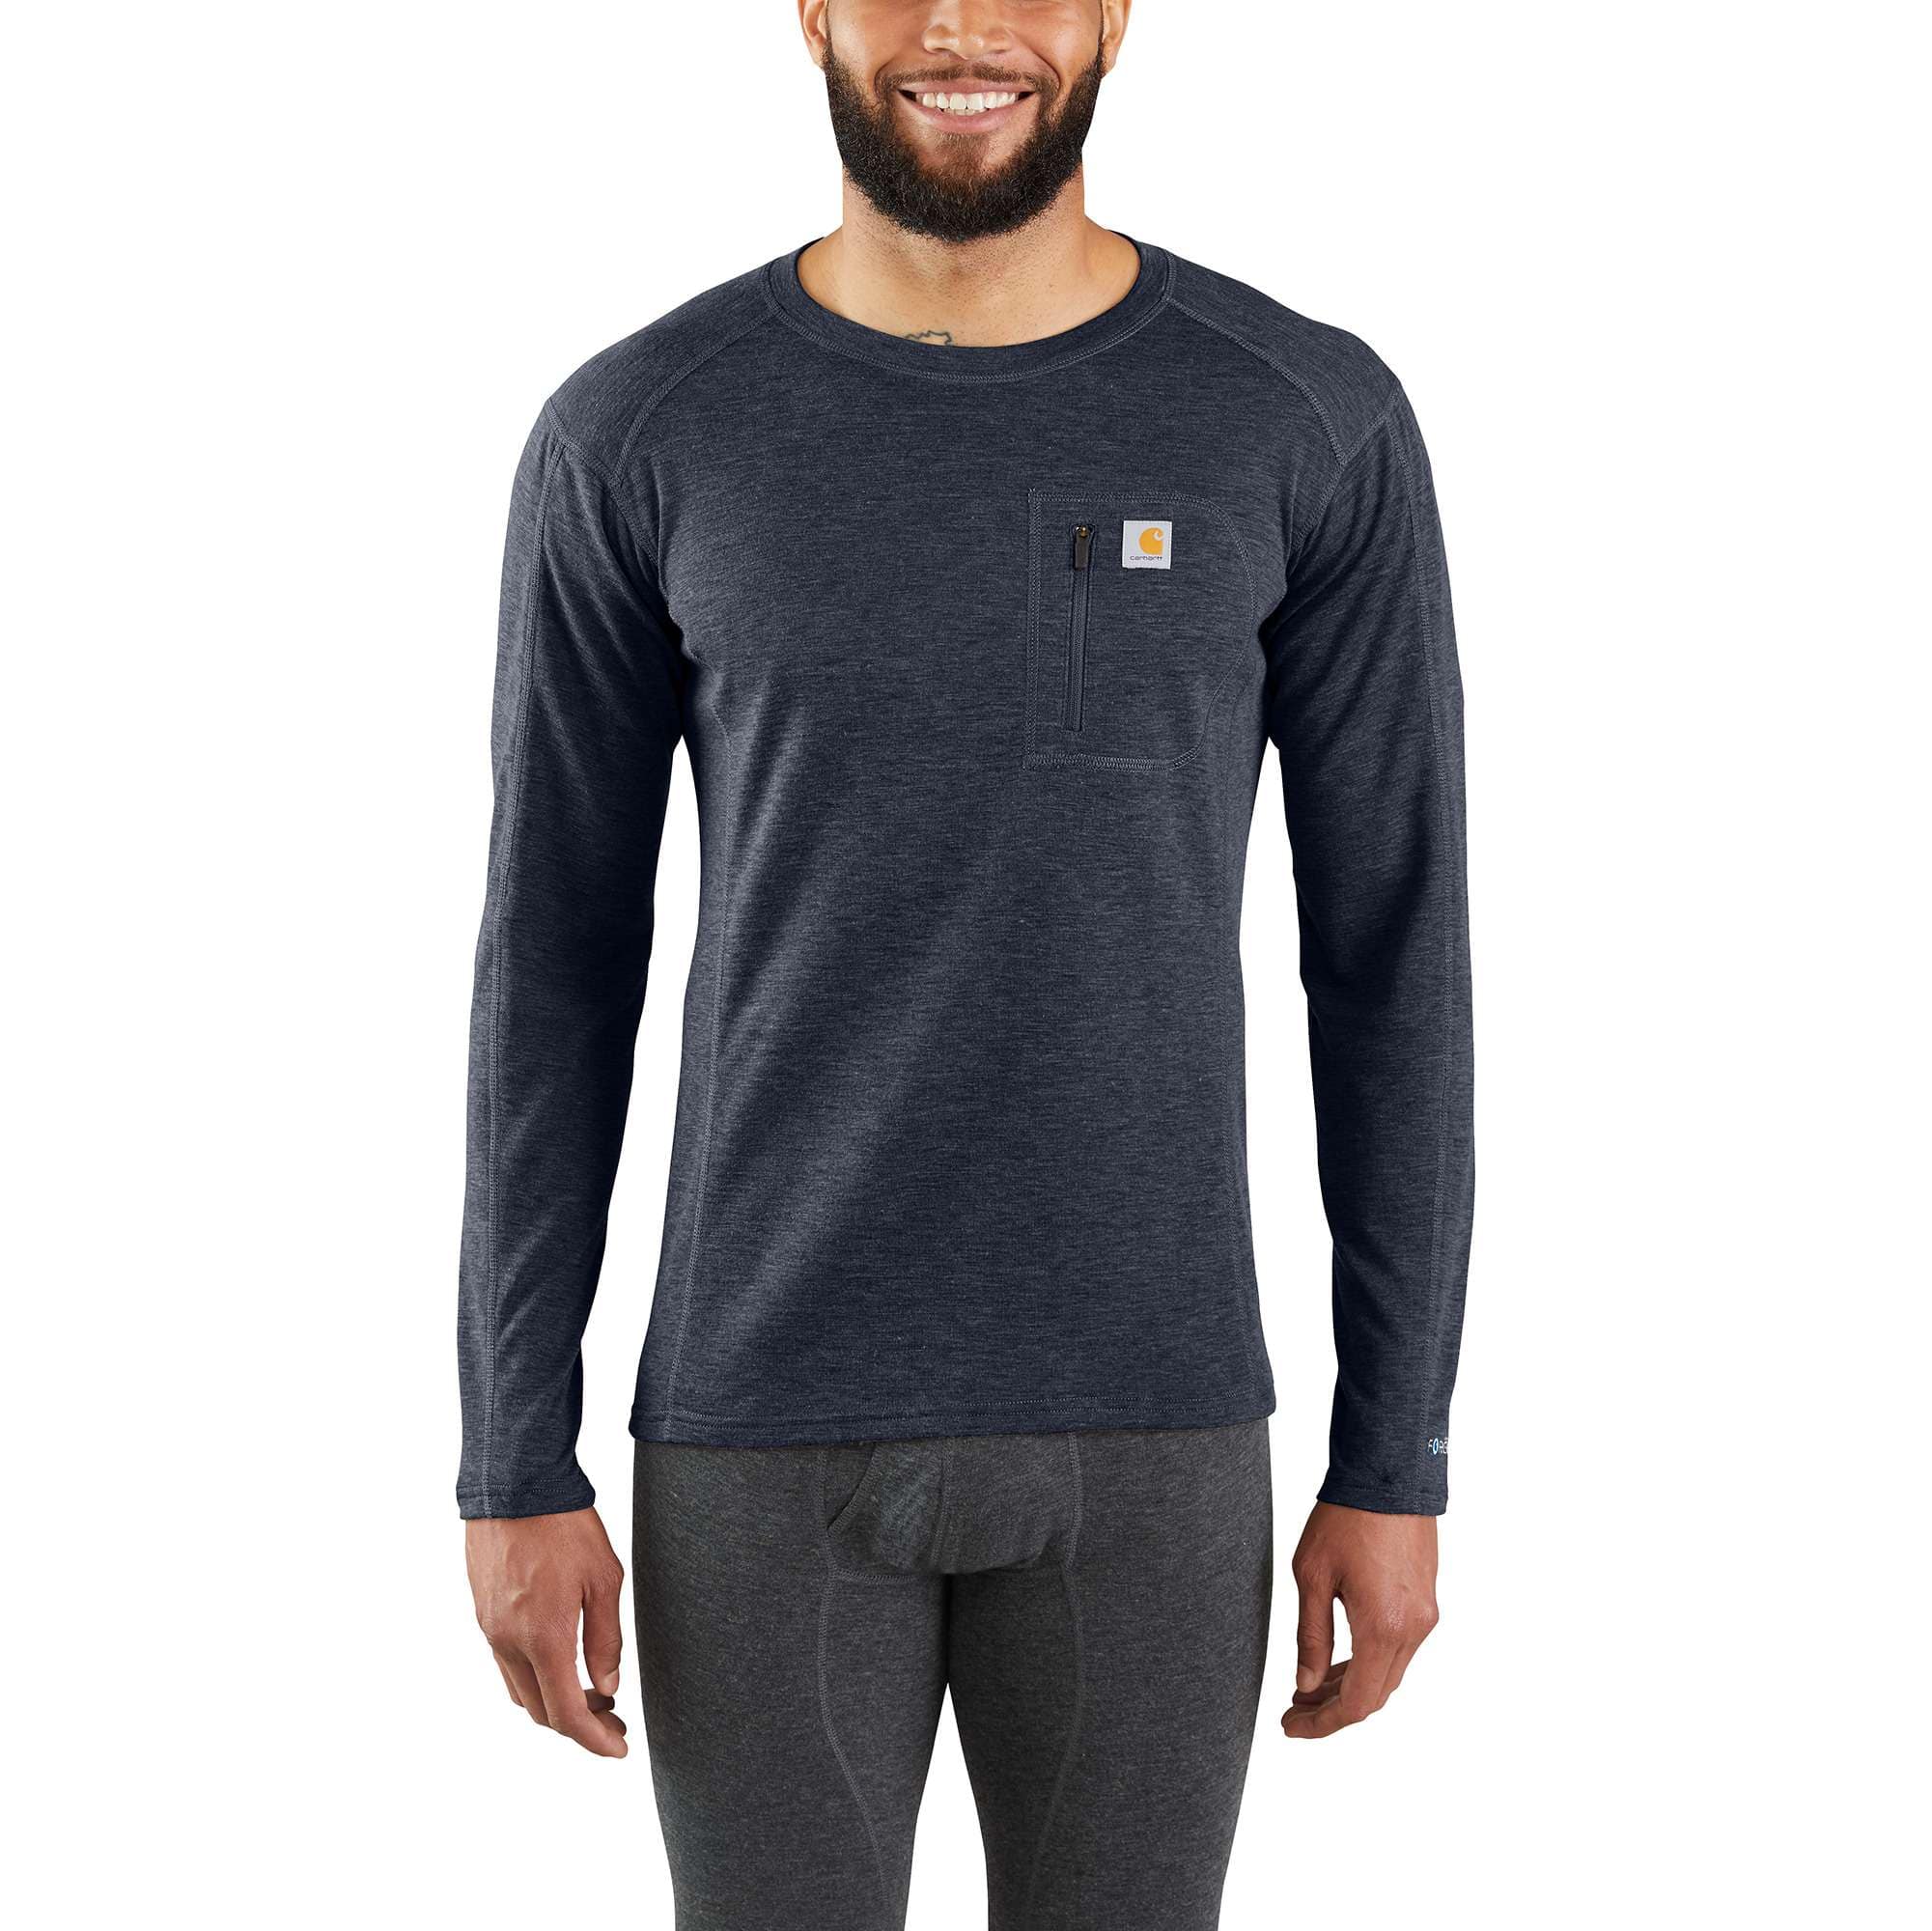 💛💛 4/$25 The North Face Heathered Grey Base-layer/ Long Underwear/ LG